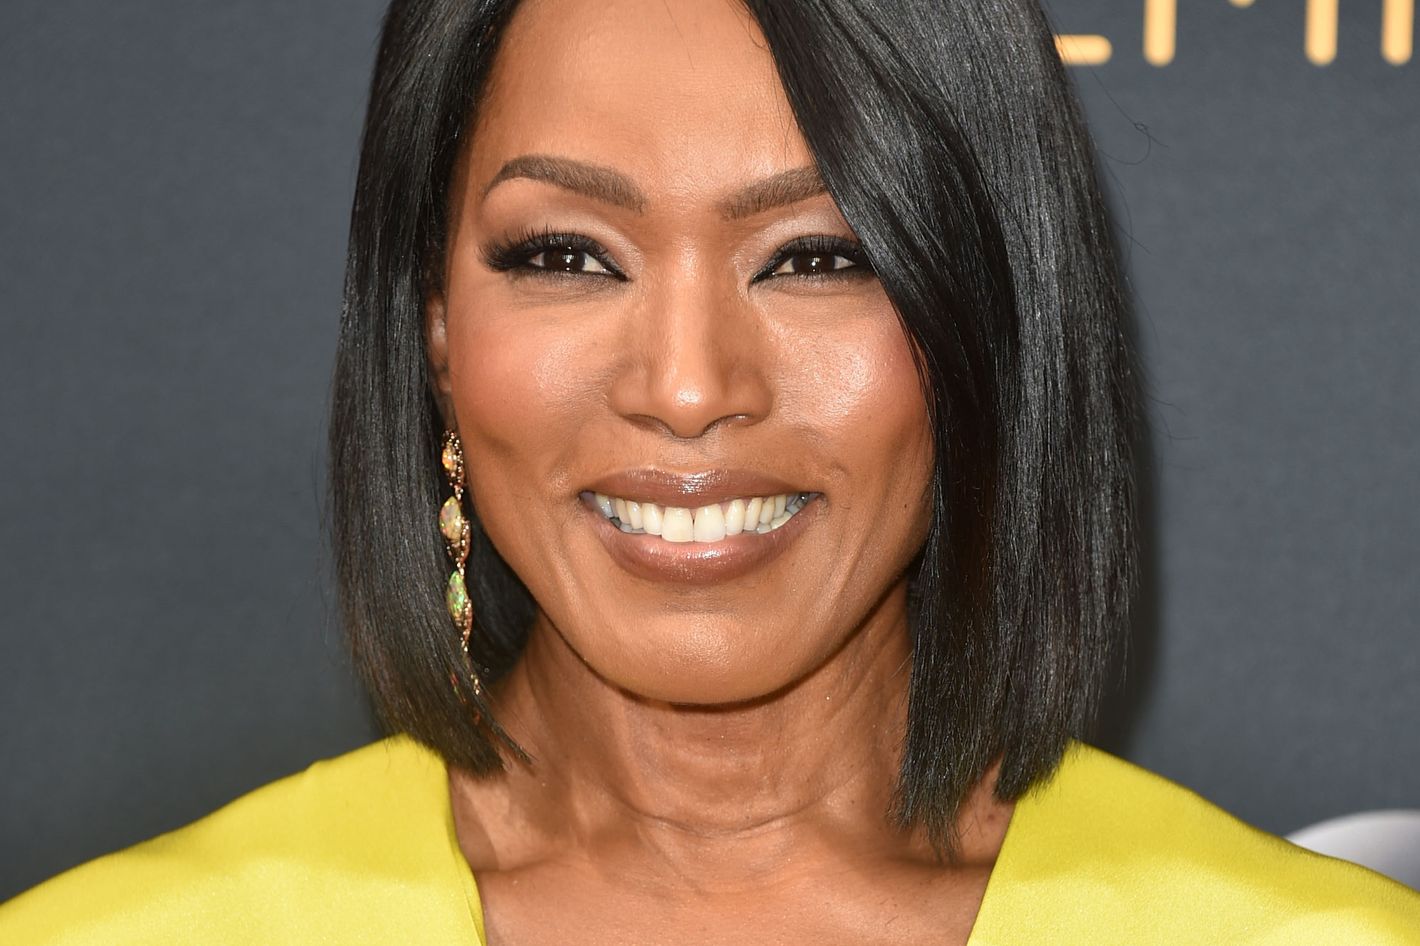 Angela Bassett, She is known for portraying real life African-American wome...